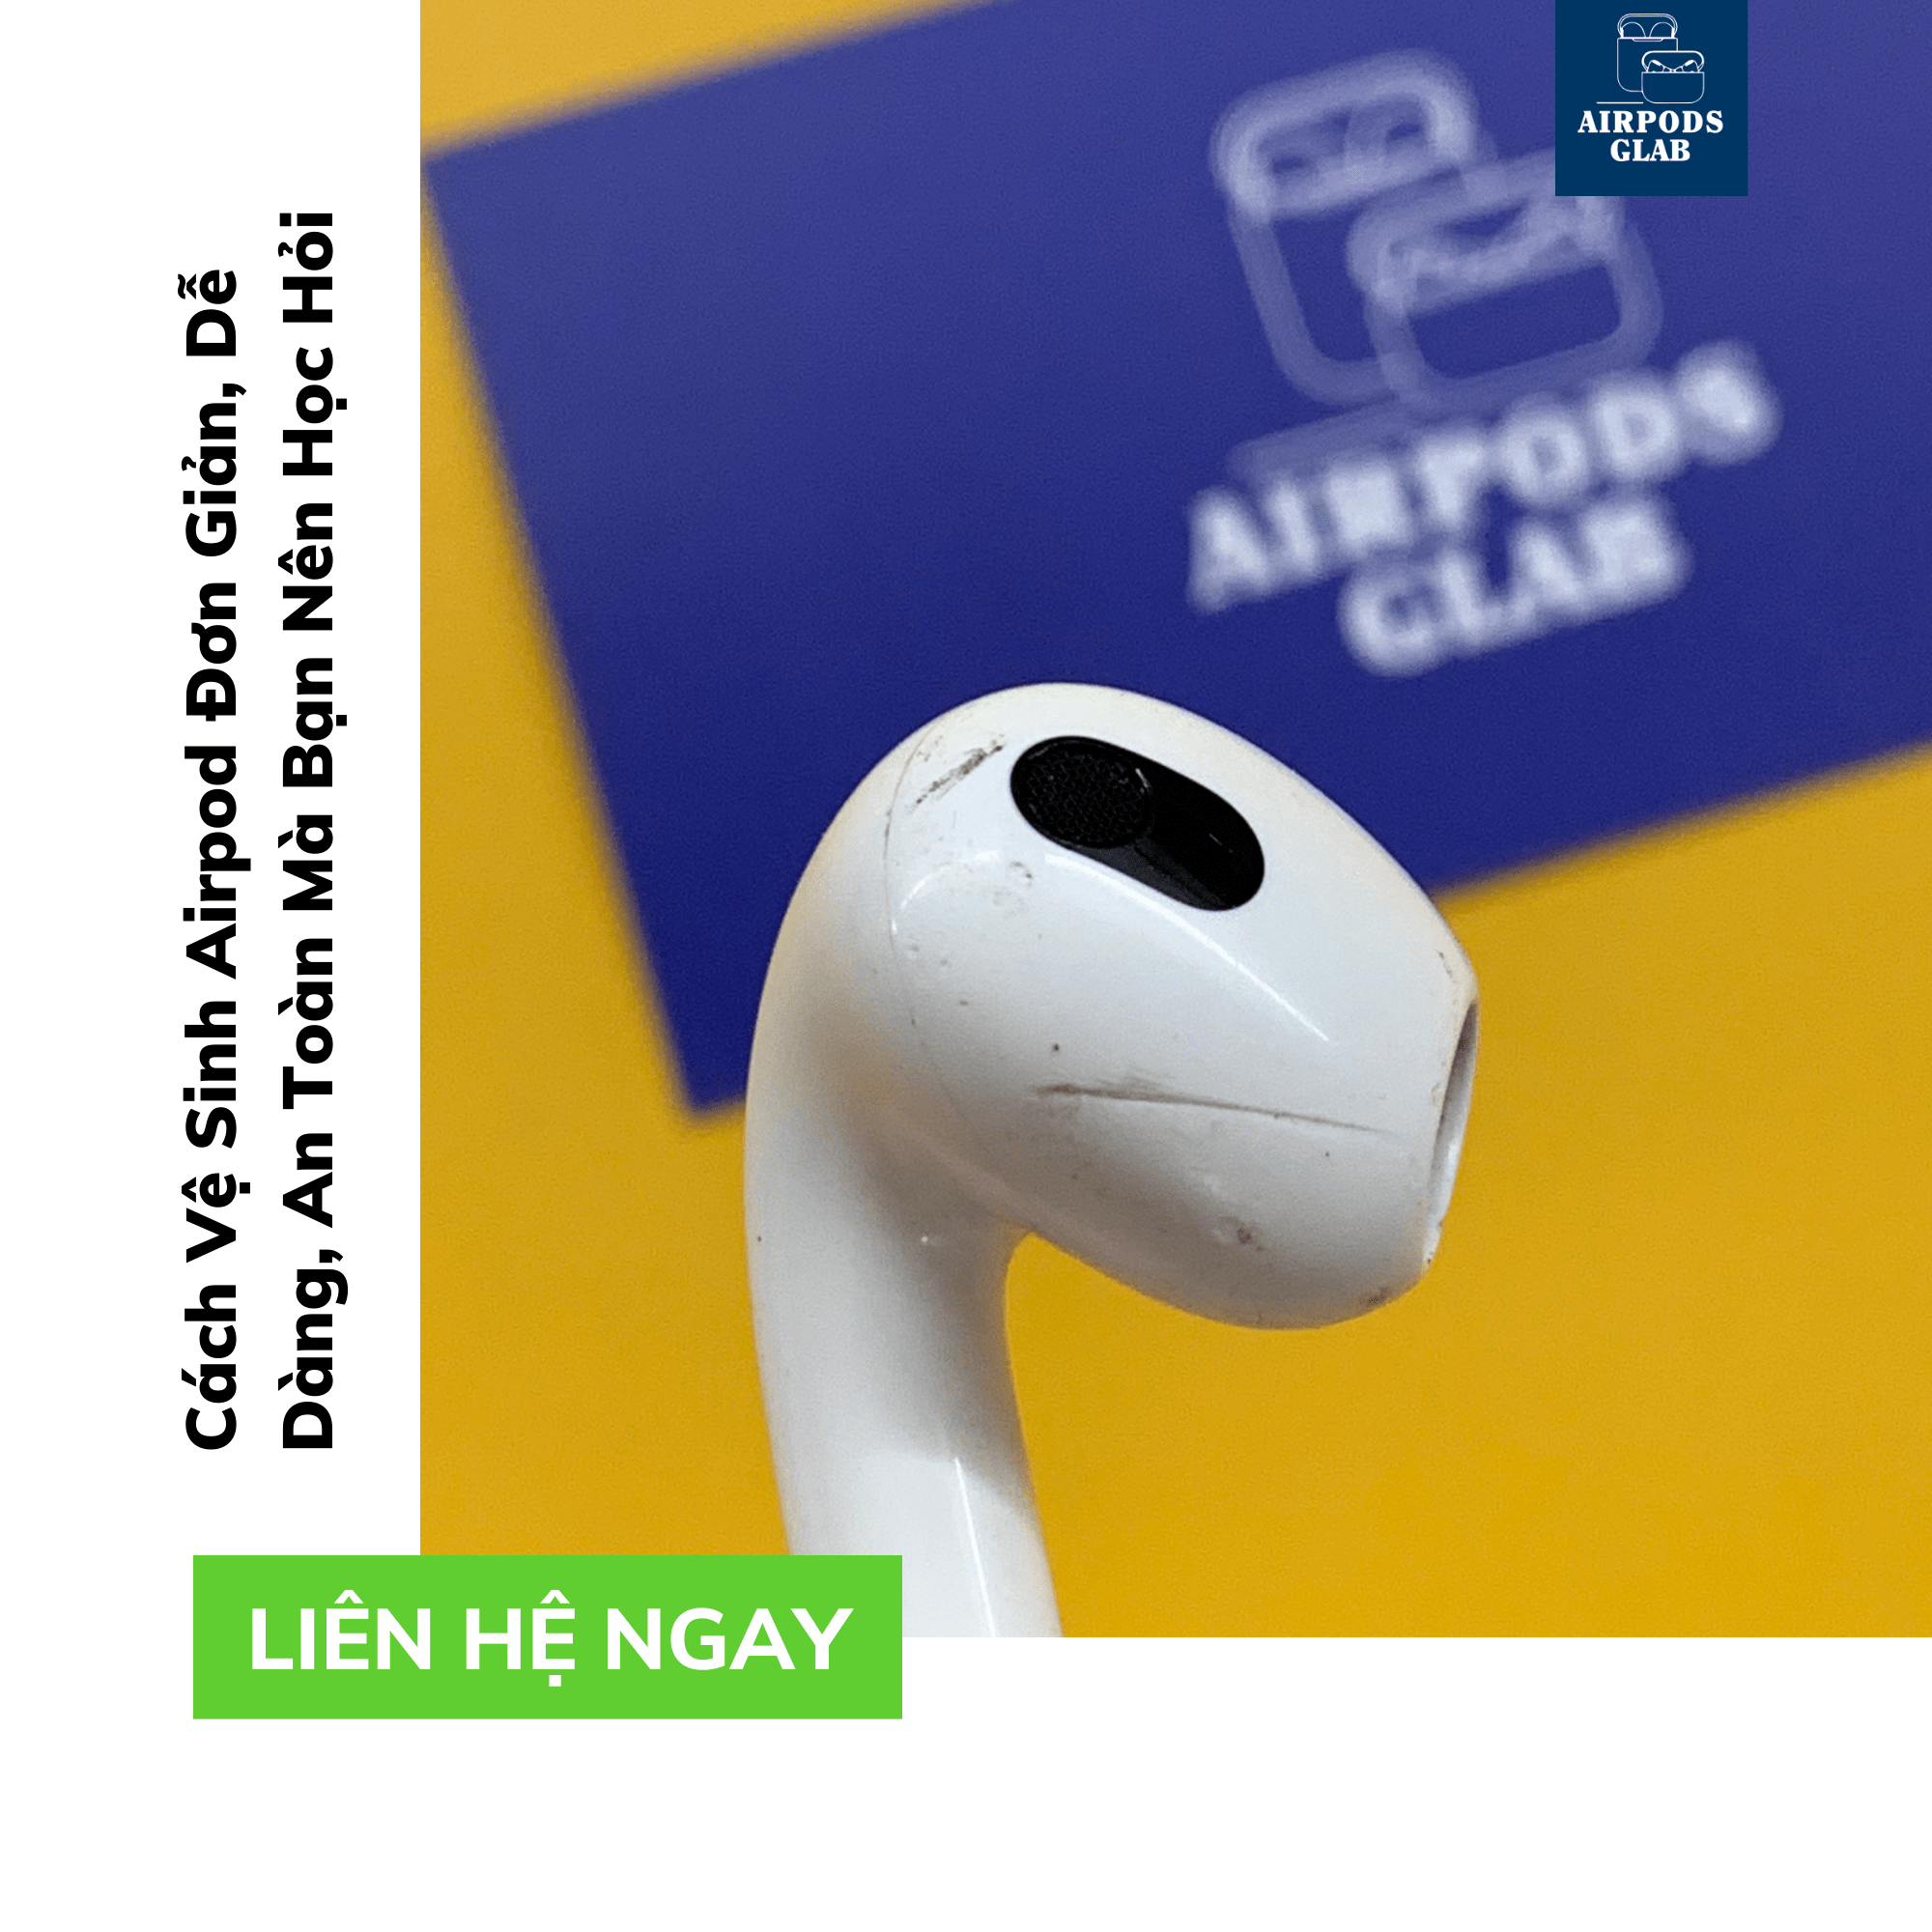 cach-ve-sinh-airpod 